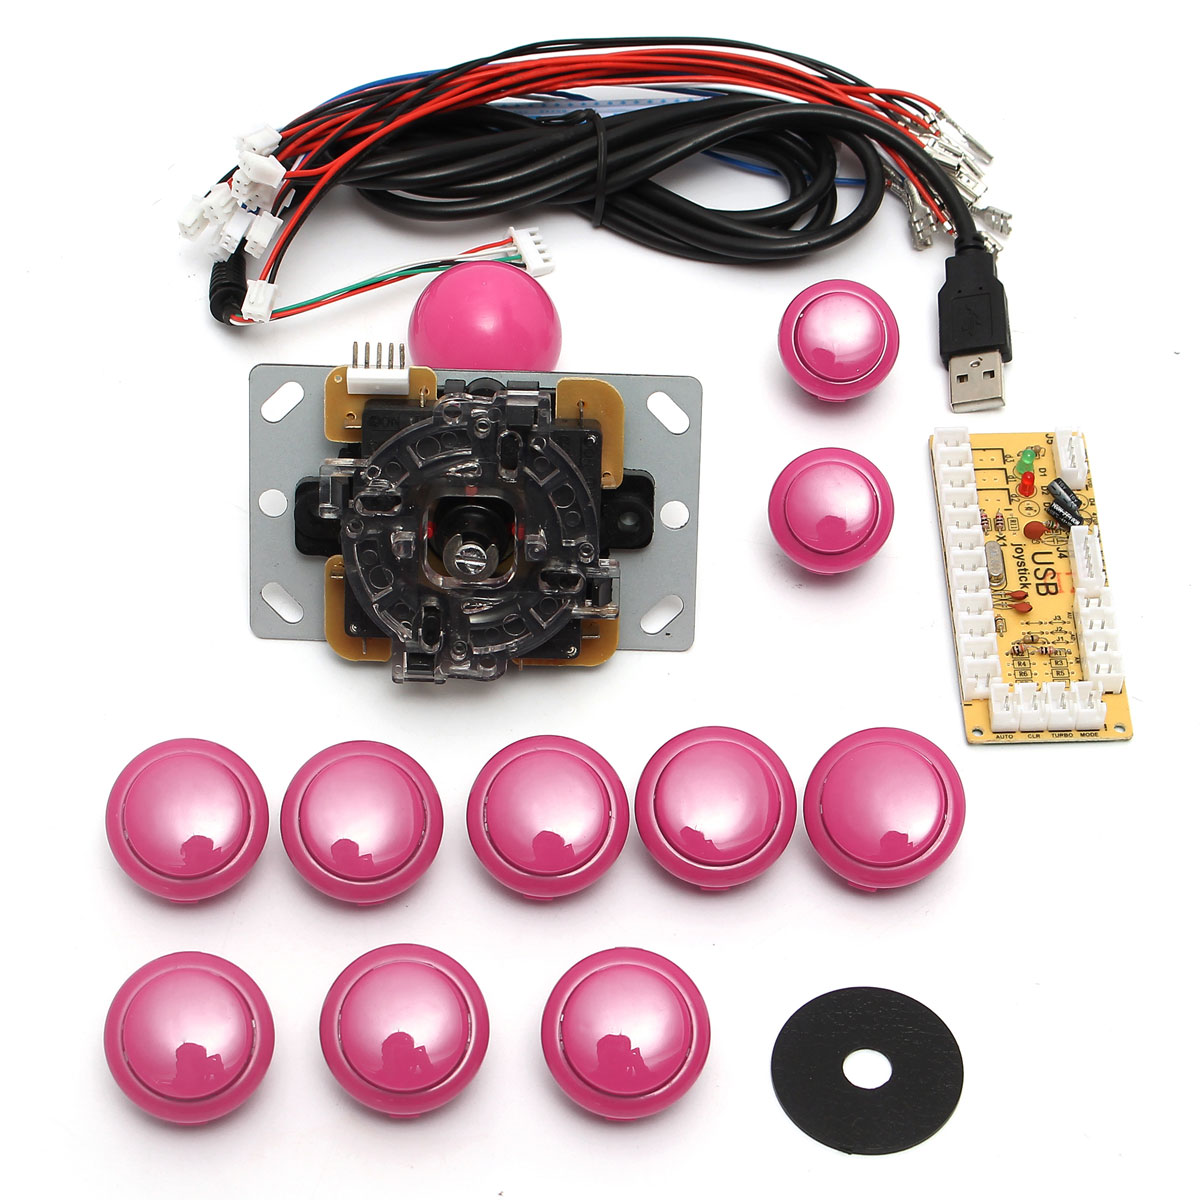 Game DIY Arcade Set Kits Replacement Parts USB Encoder to PC Joystick and Buttons 59